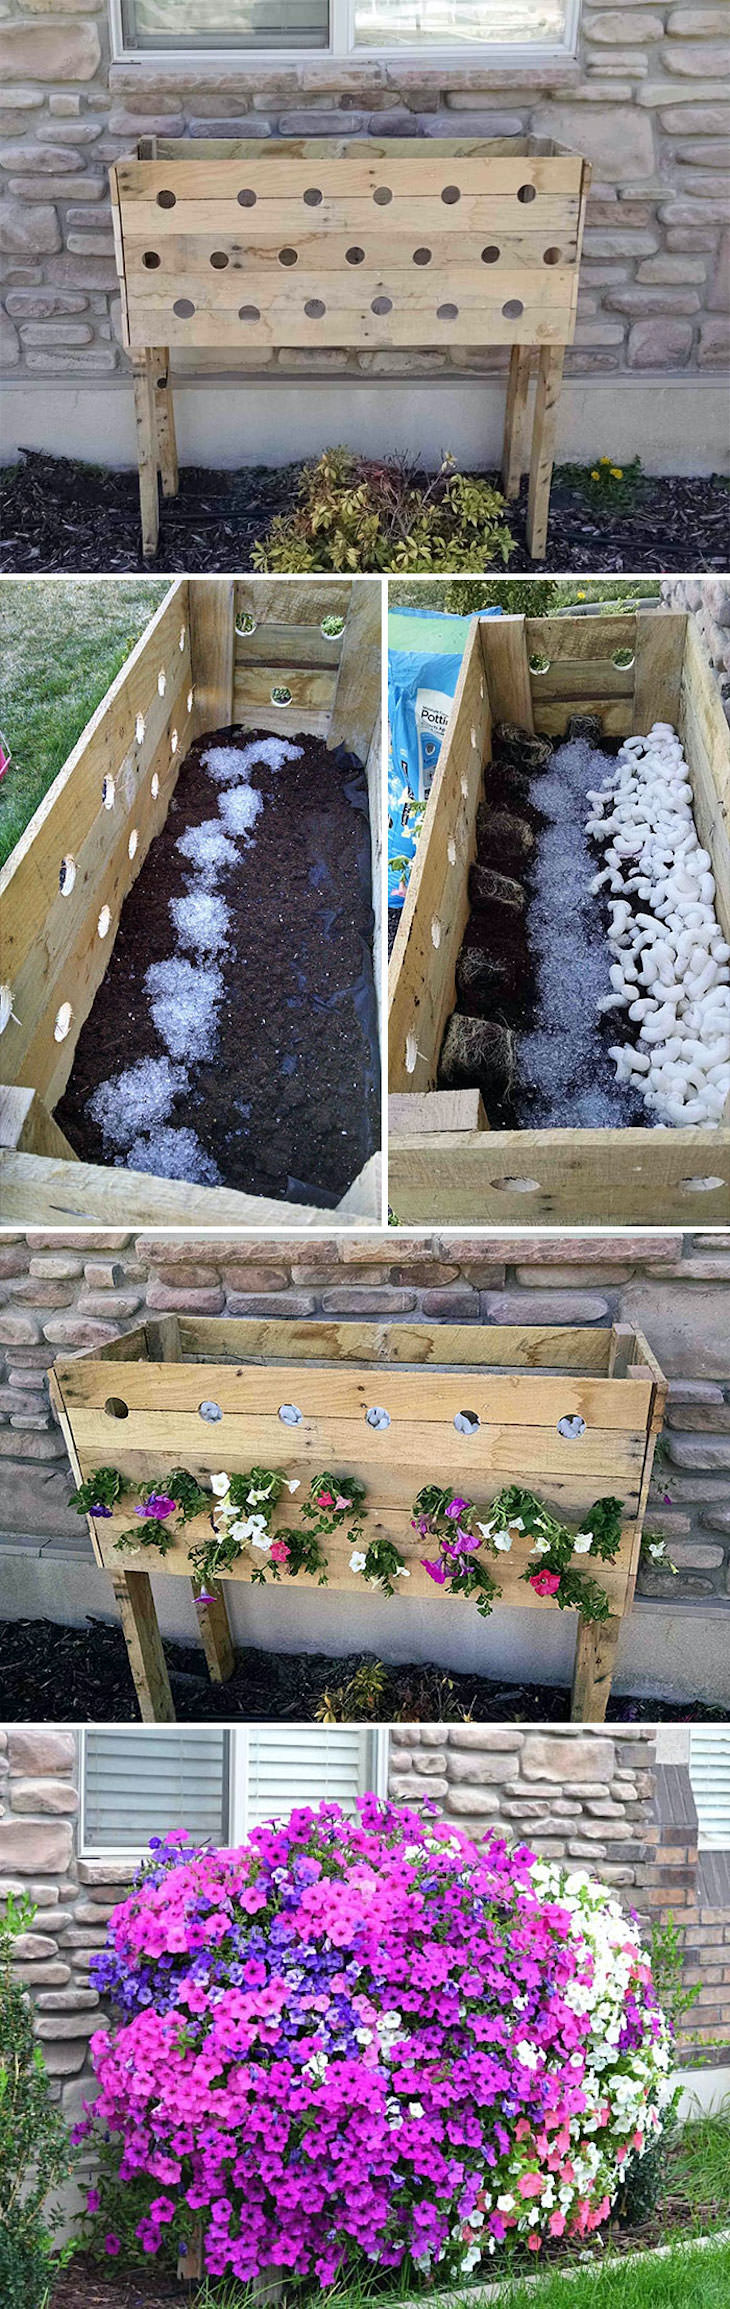 Creative Gardening Ideas and Tricks Pallet planter box for cascading flowers